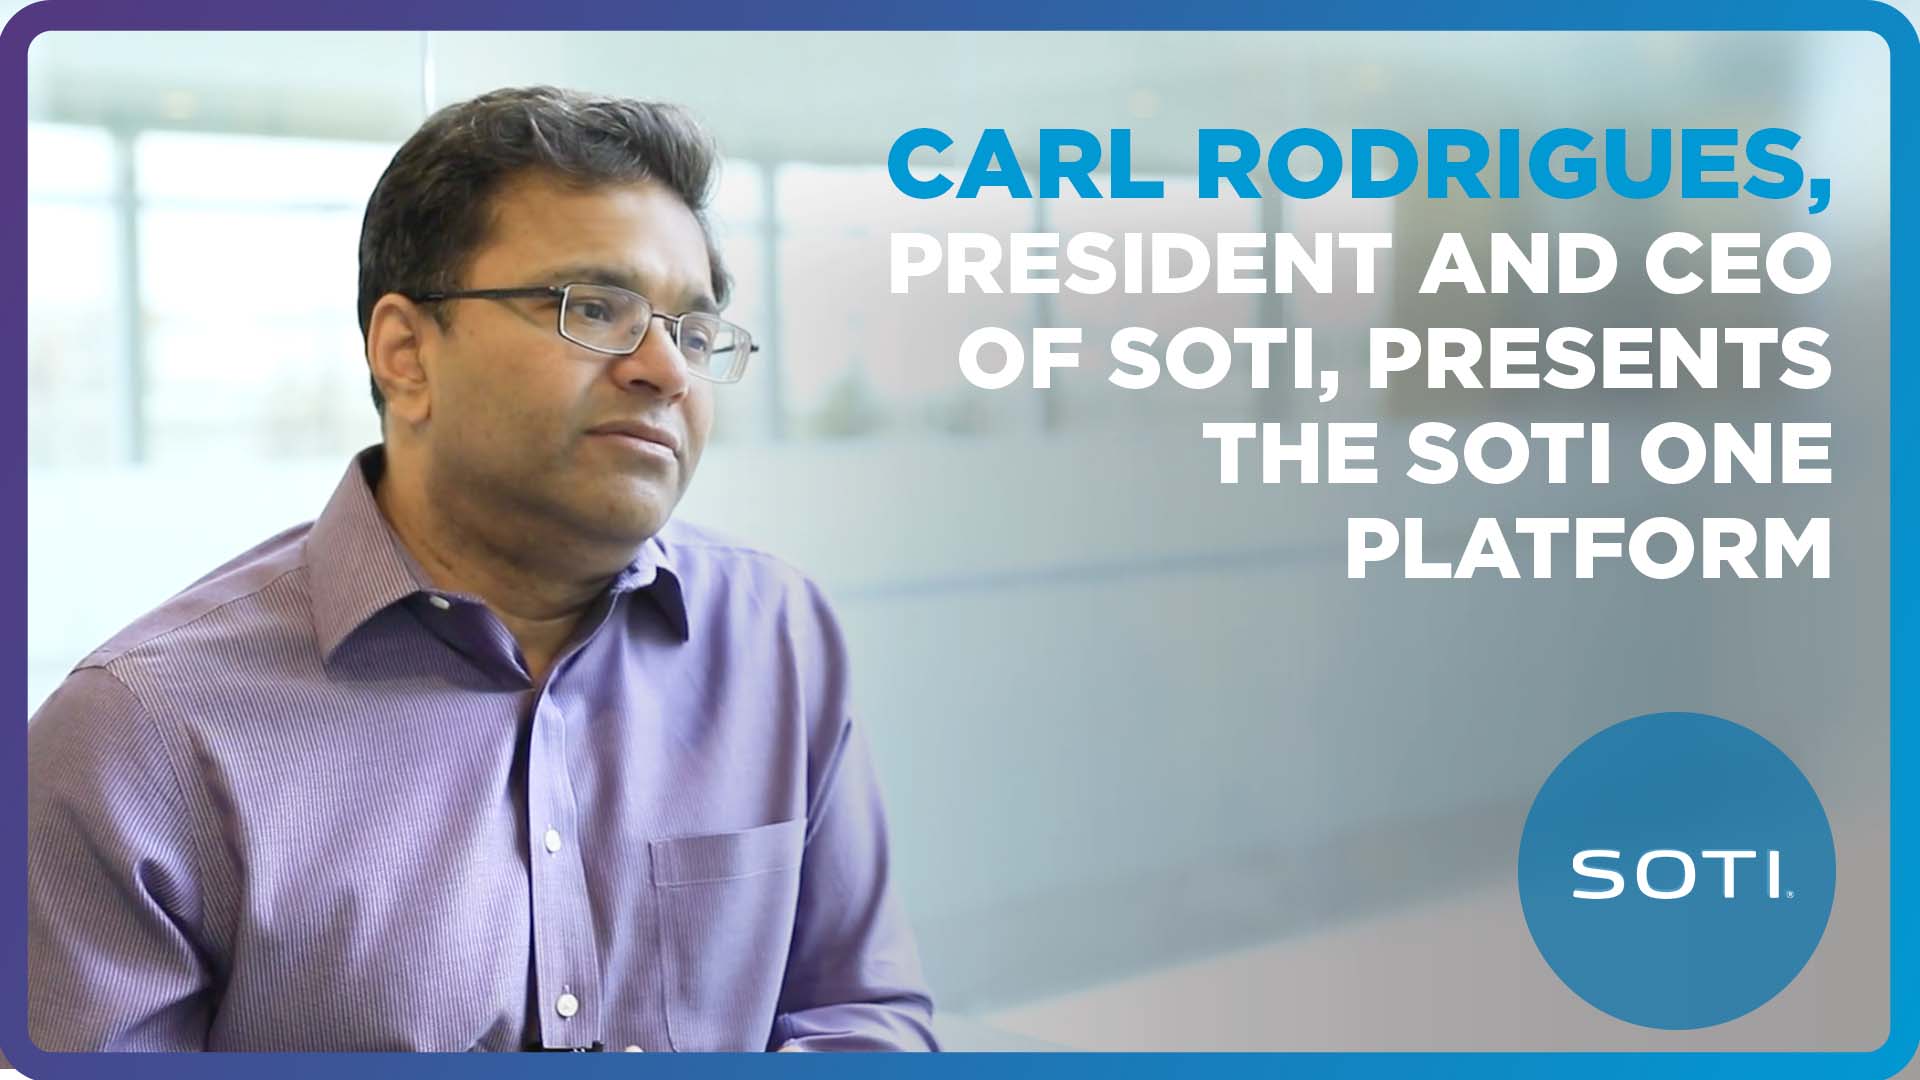 Video of Carl Rodrigues, President and CEO of SOTI, Presenting the SOTI ONE Platform